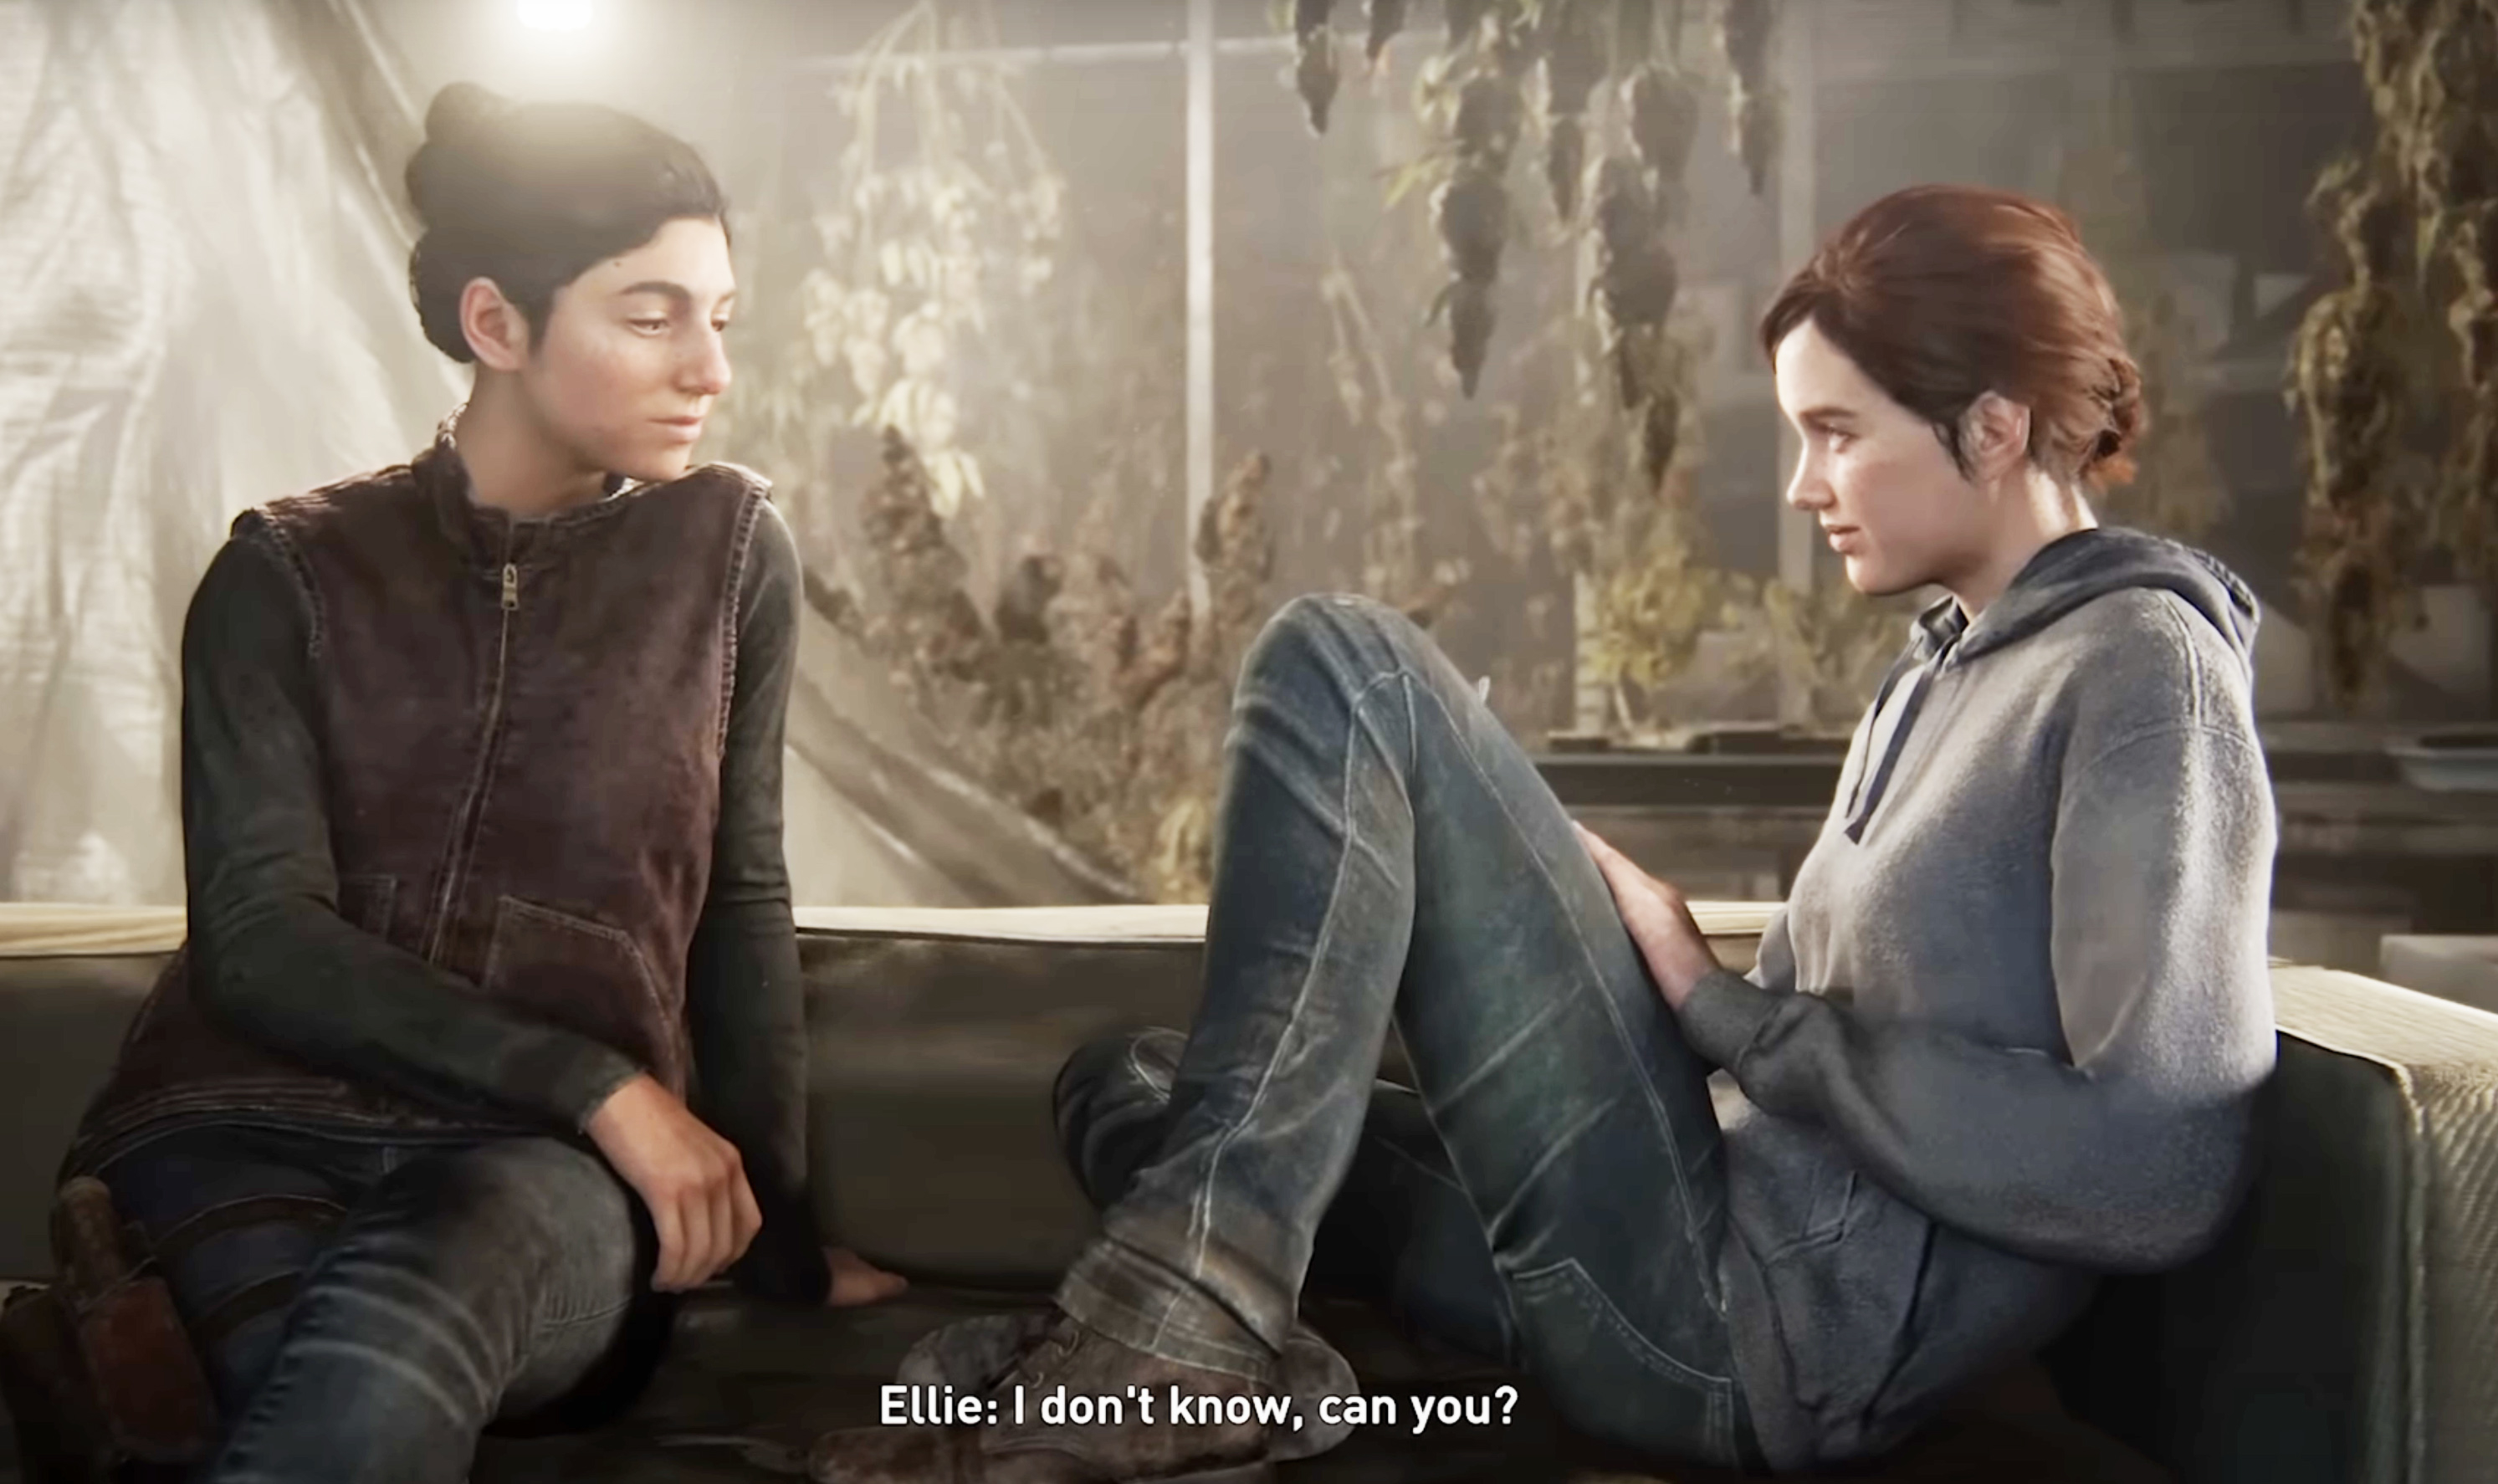 Two animated characters, Ellie and another, are in a relaxed pose with dialogue text from a game scene